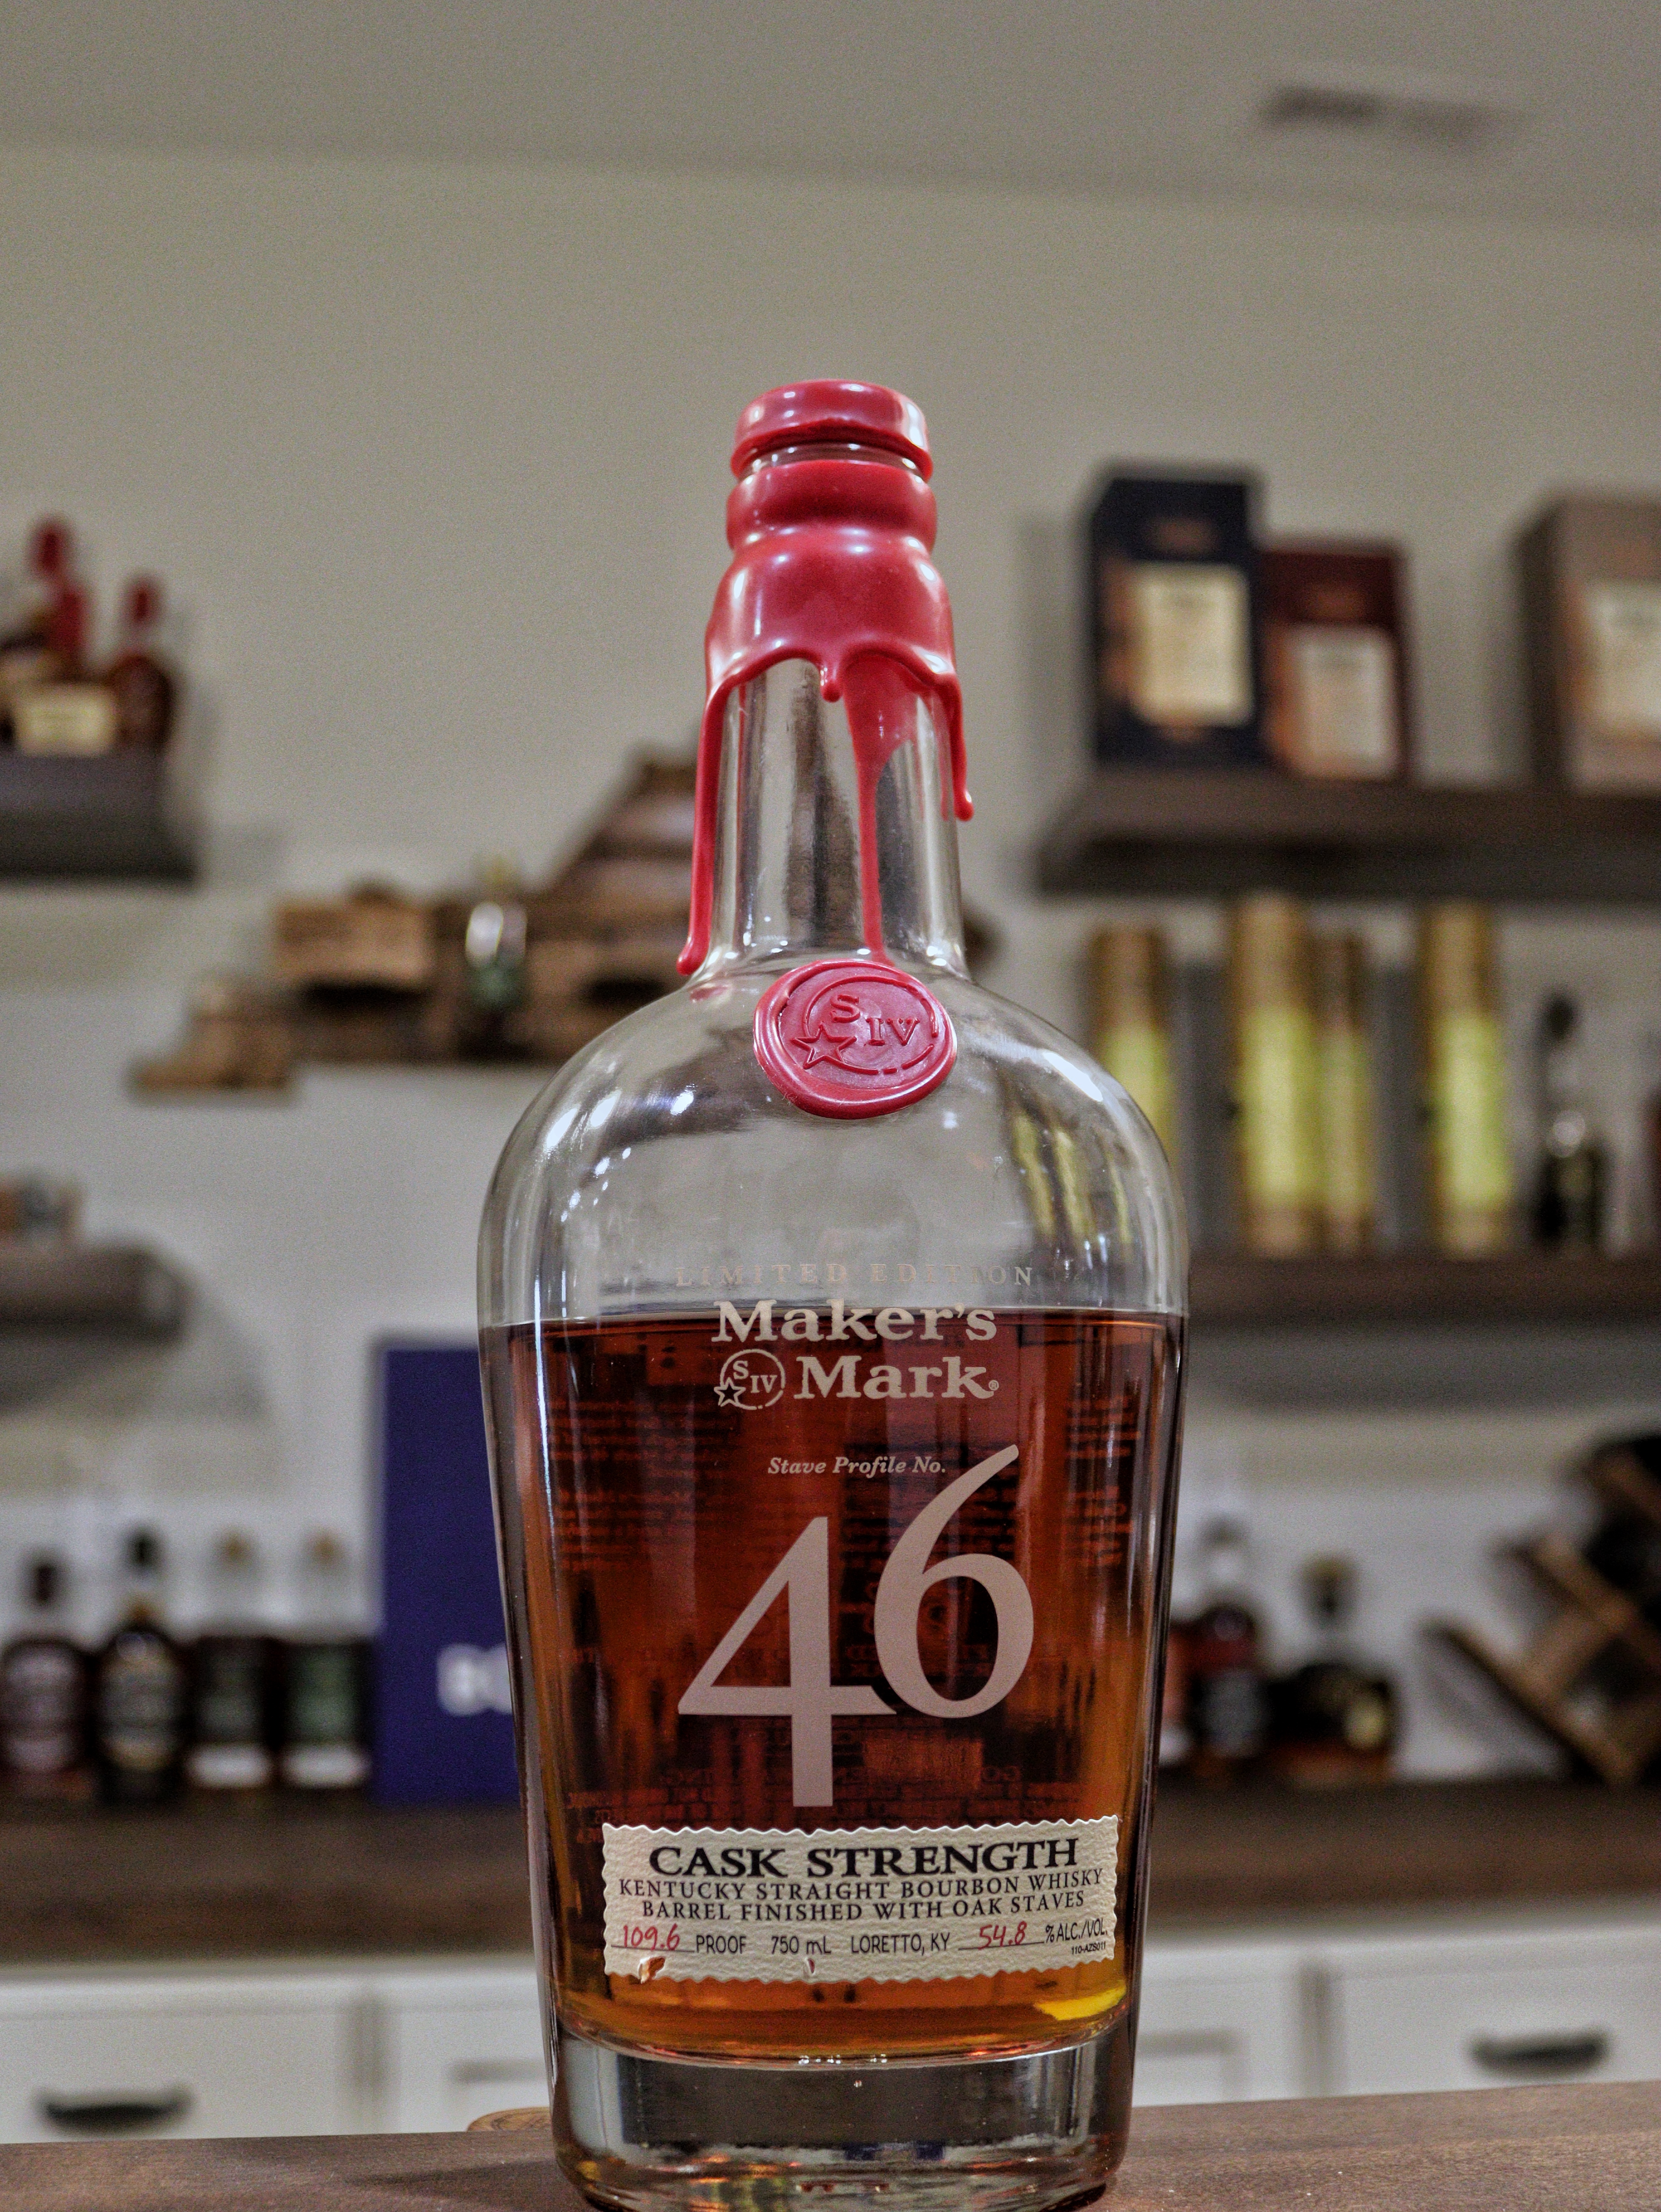 Maker’s Mark 46 Cask Strength May Look New But Tastes Great